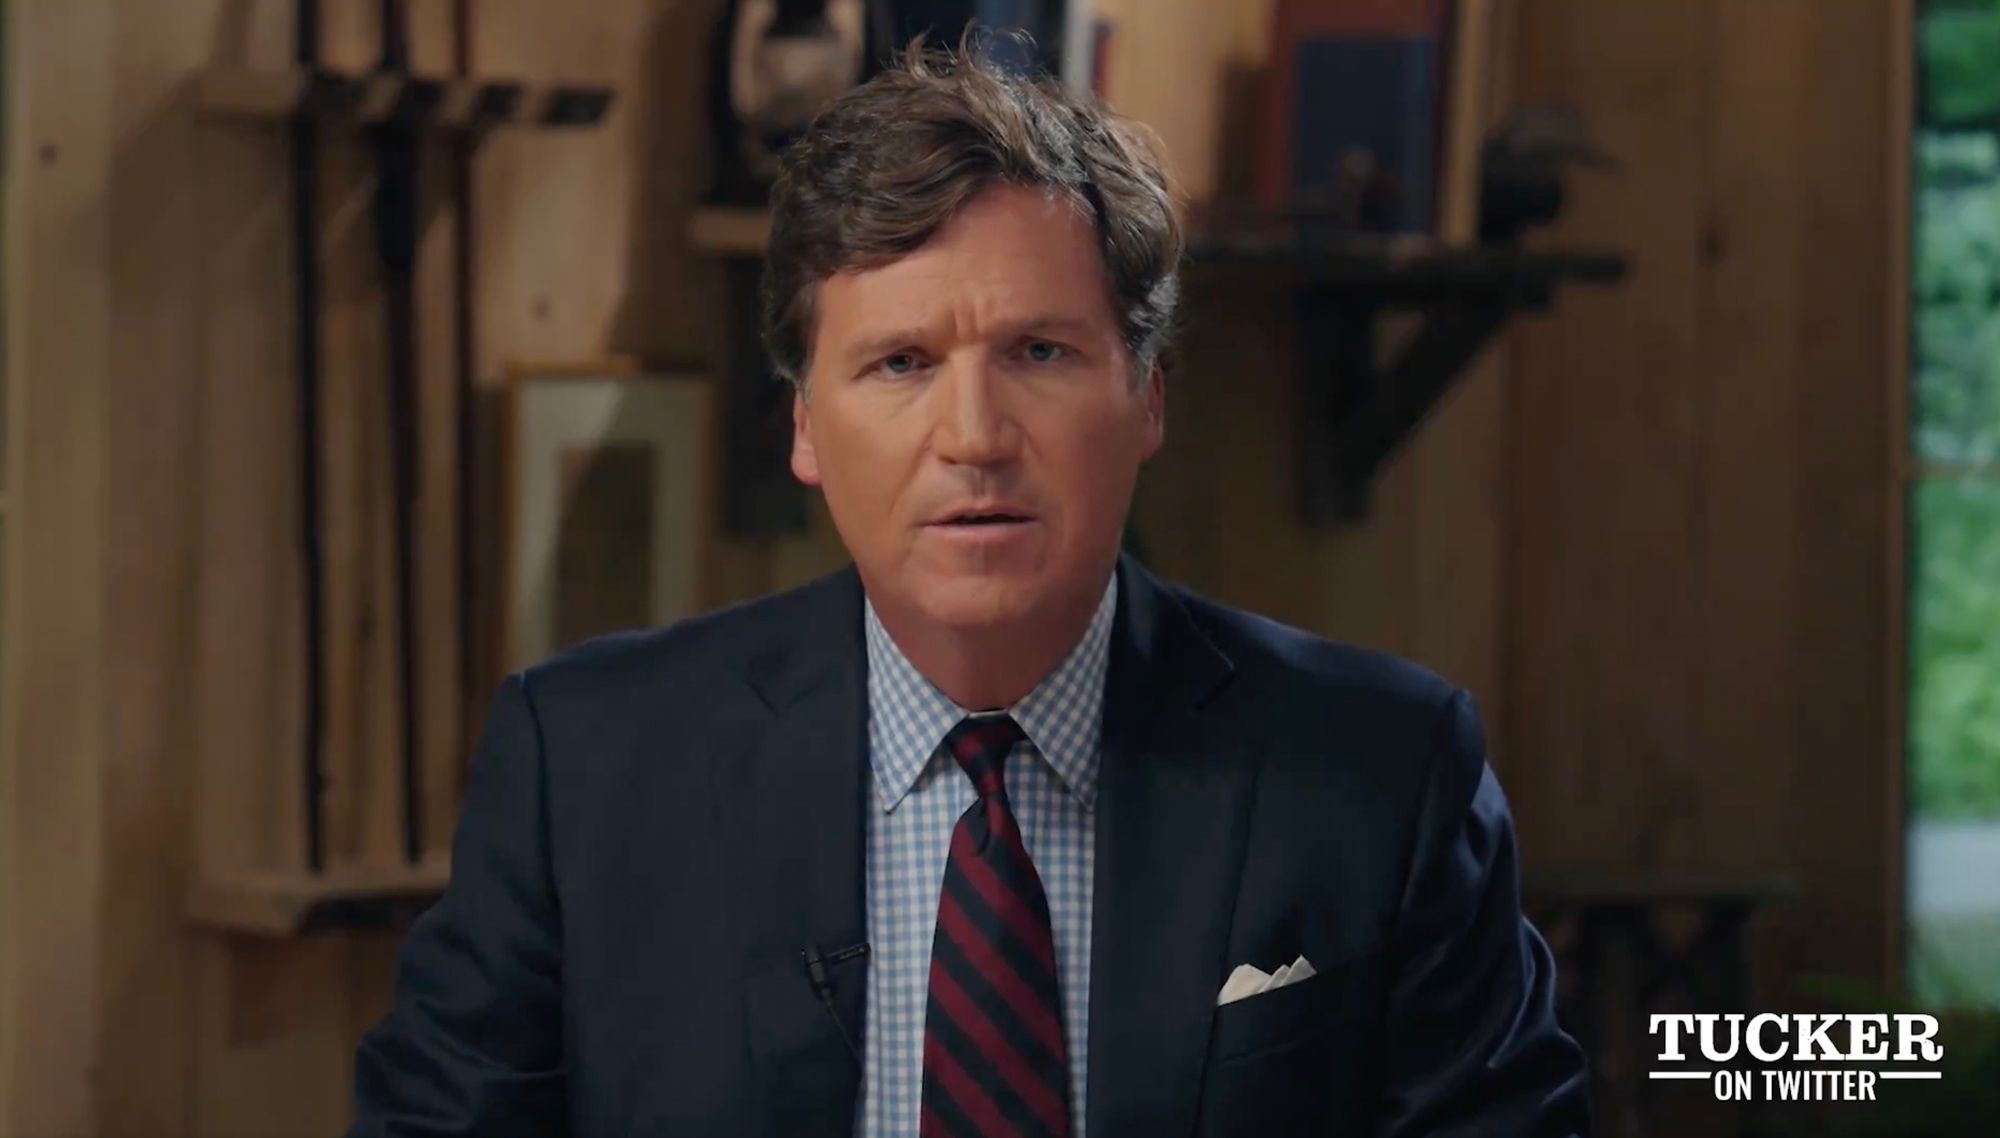 Unbelievable: Tucker's New Show Gets Millions of Views Showing Twitter's Potential As Video Platform